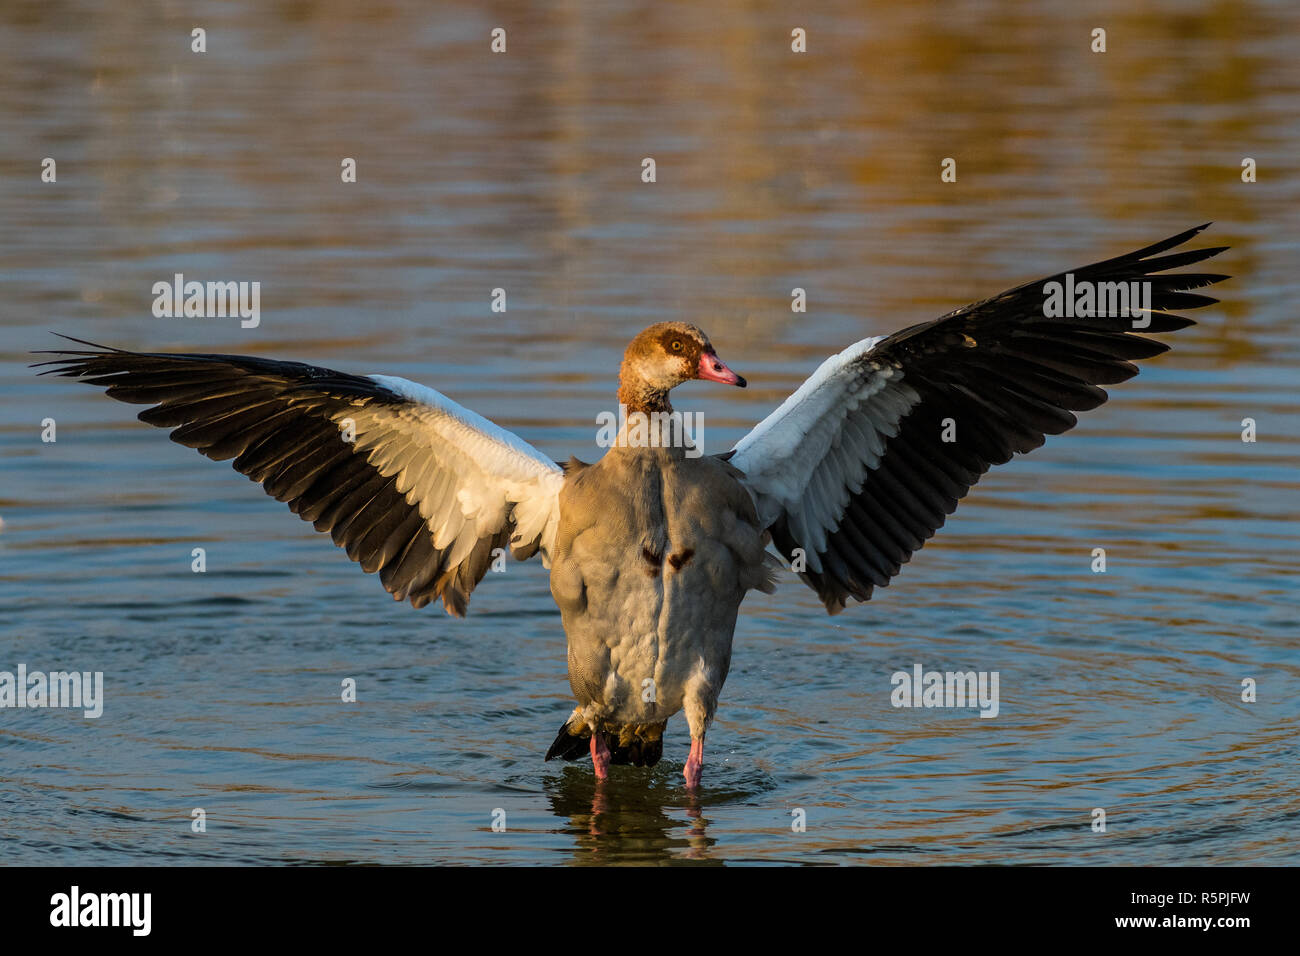 Madrid, Spain. 1st Dec, 2018. Egyptian goose (Alopochen aegyptiaca) with its wings spread during an autumn day in the Valdebernardo Forest Park. Egyptian geese are native to Africa. Due to its colonizing potential and that it constitute a serious threat to native species, habitats or ecosystems, this species has been included in the Spanish Catalog of Invasive Exotic Species. Credit: Marcos del Mazo/Alamy Live News Stock Photo